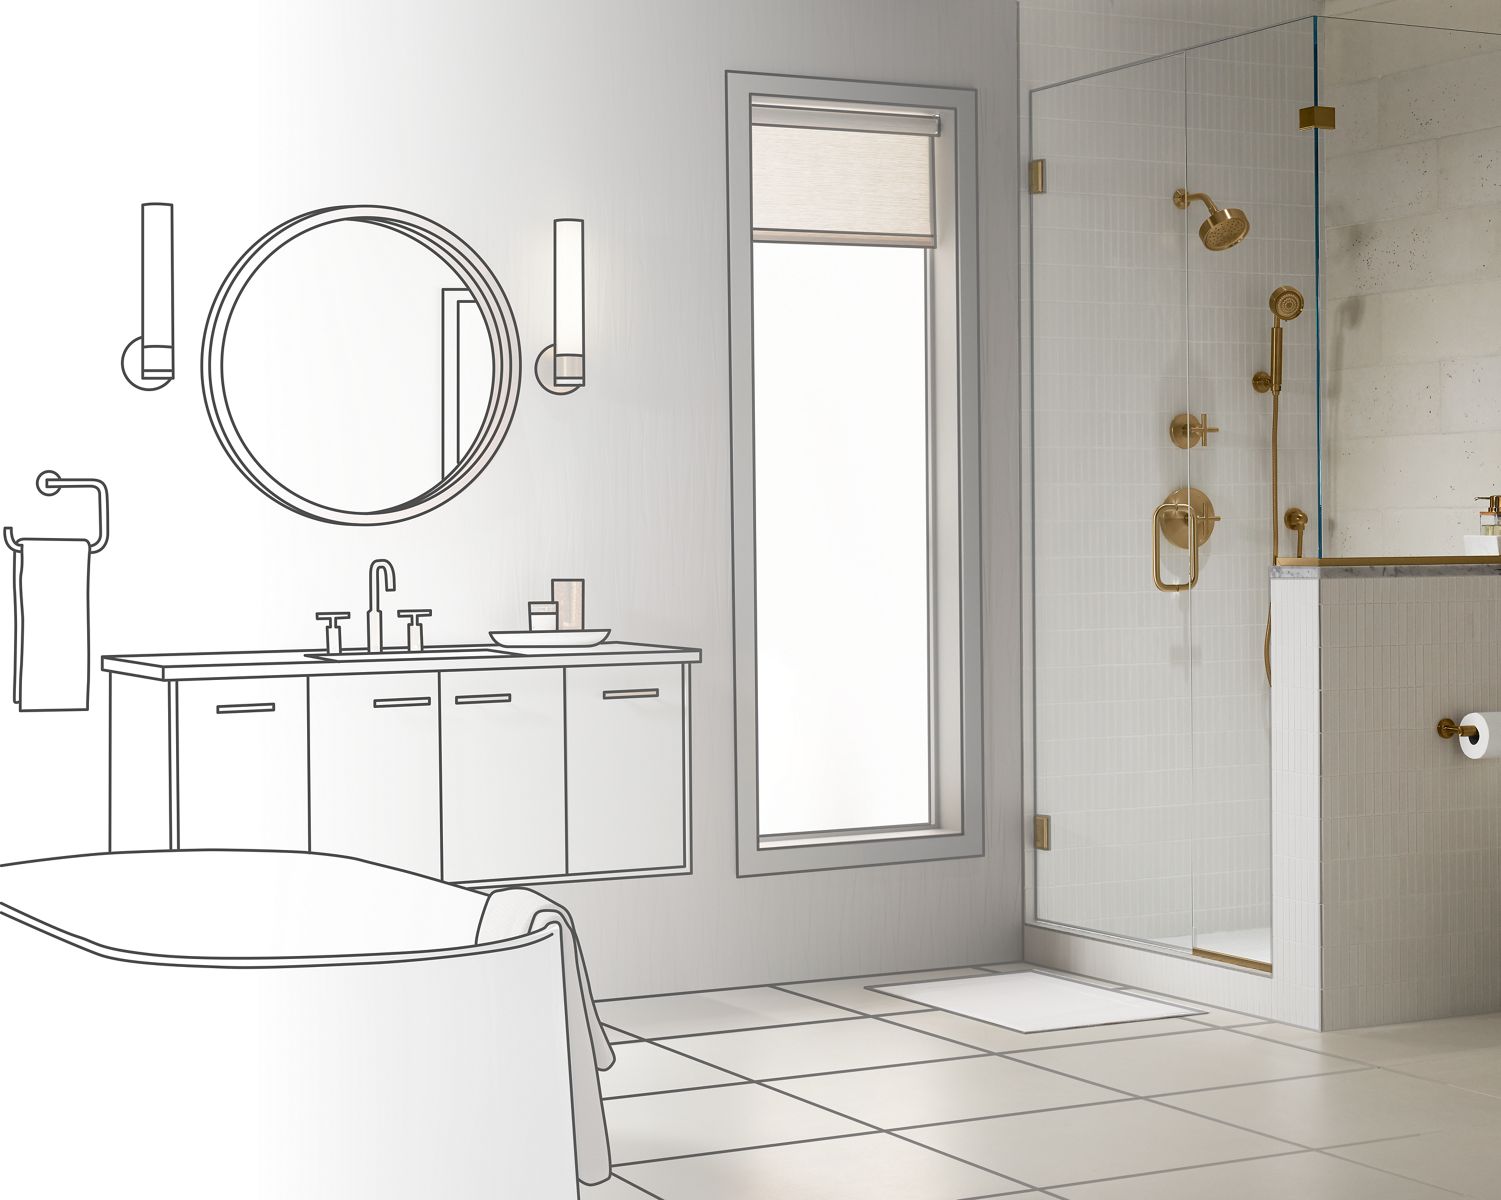 Kohler Toilets Showers Sinks Faucets And More For Bathroom